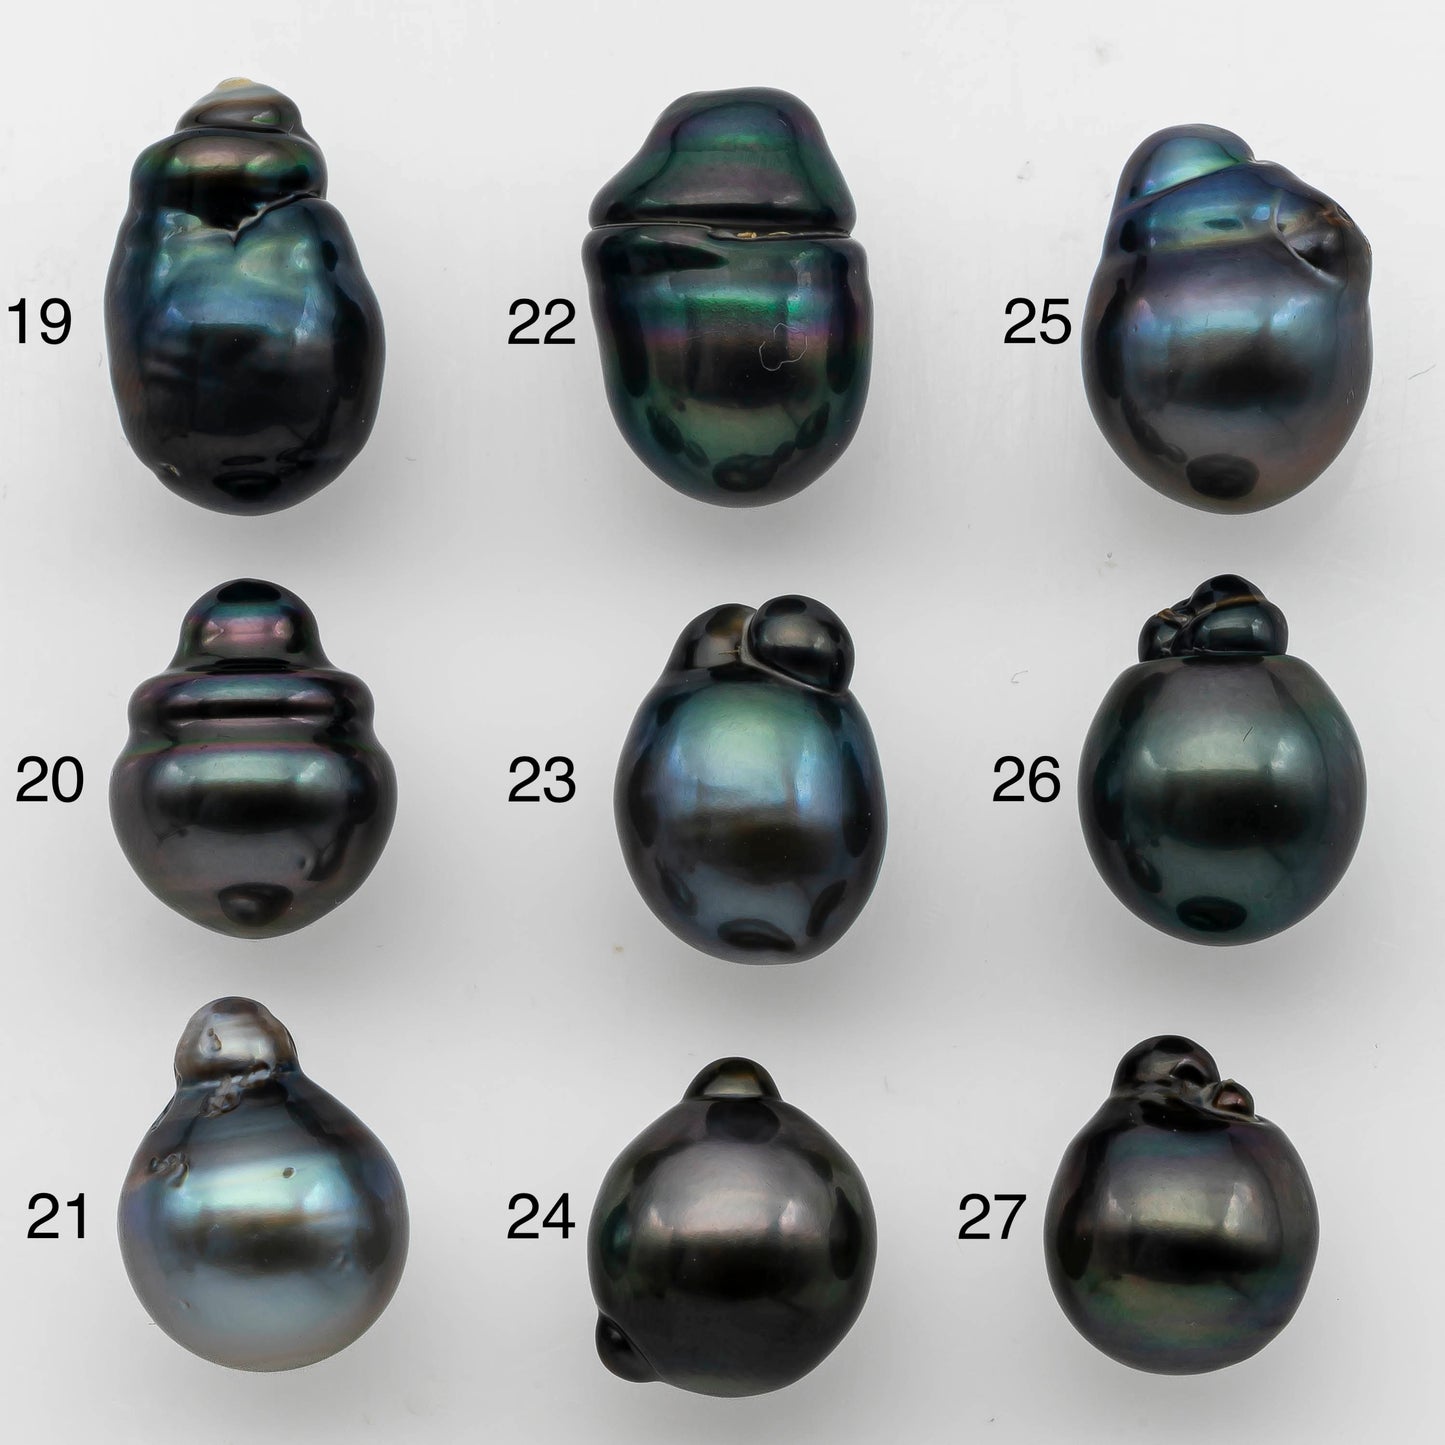 10-11mm Baroque Tahitian Pearl Drops Undrilled Loose Single Piece in High Luster and Natural Color with Blemishes, SKU # 1490TH